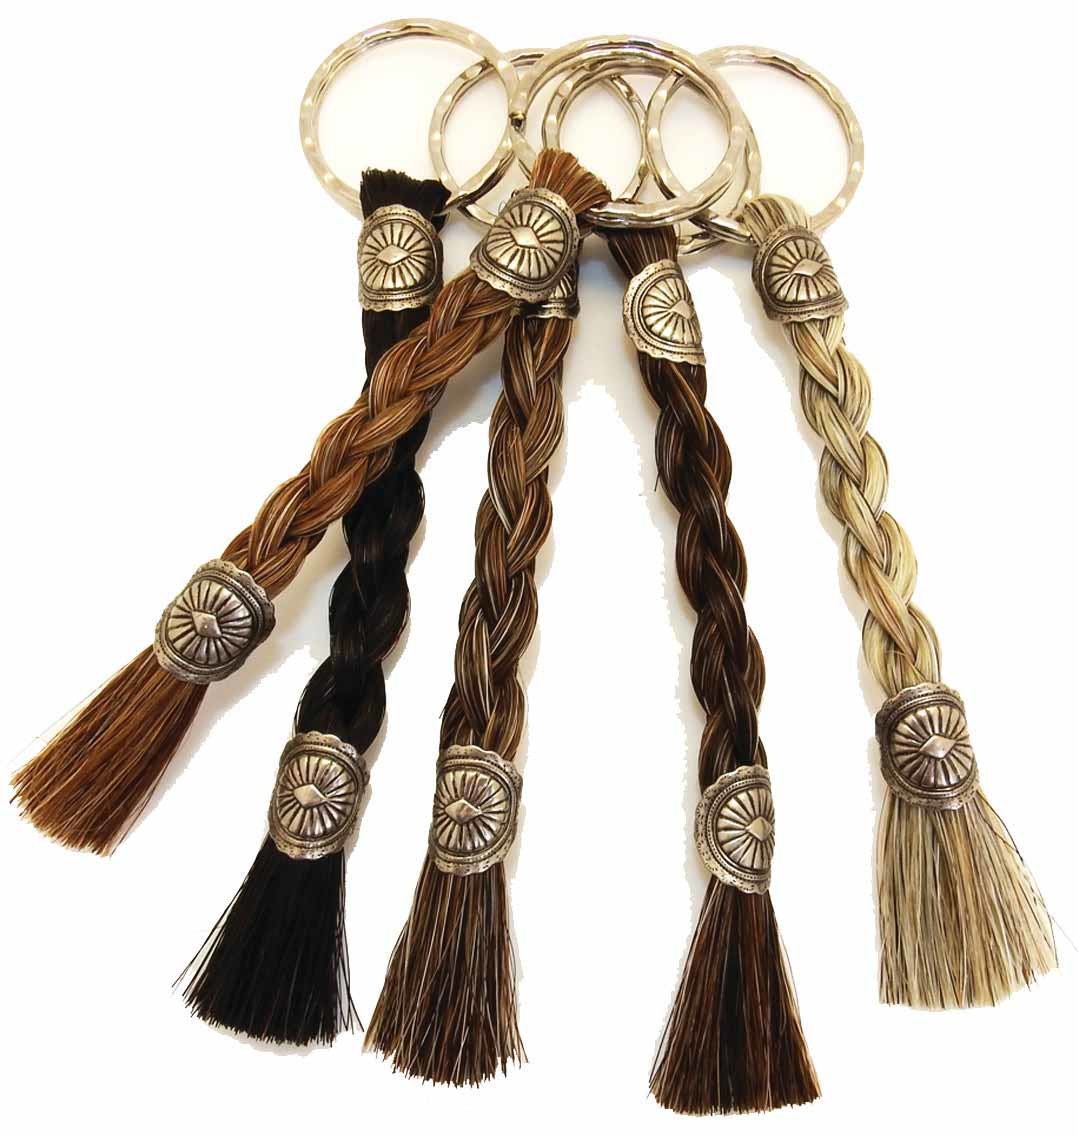 Cowboy Collectibles-Horsehair Braided Keychain